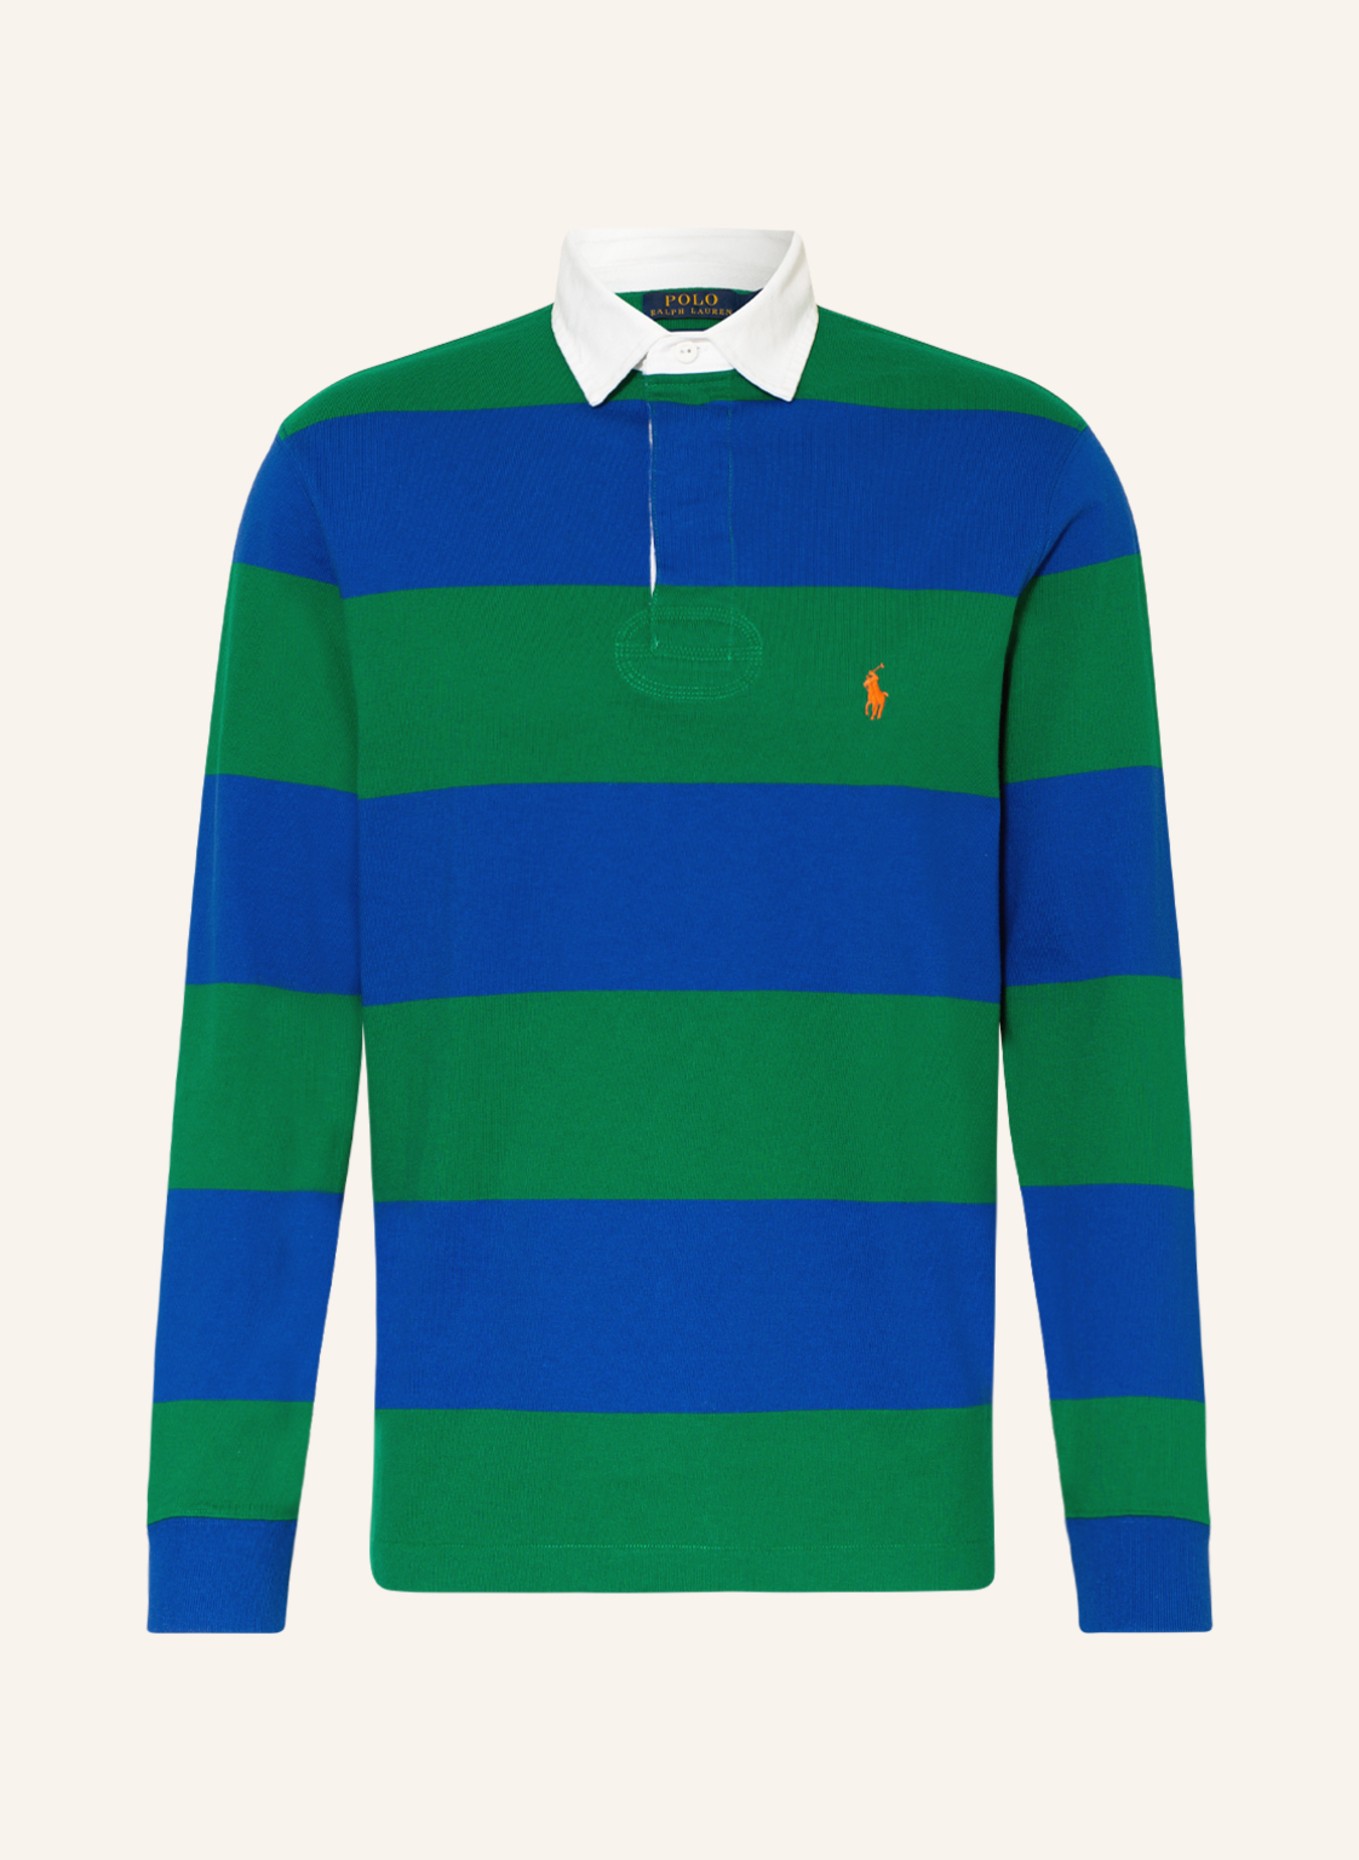 POLO RALPH LAUREN Rugby shirt classic fit in green/ blue/ white